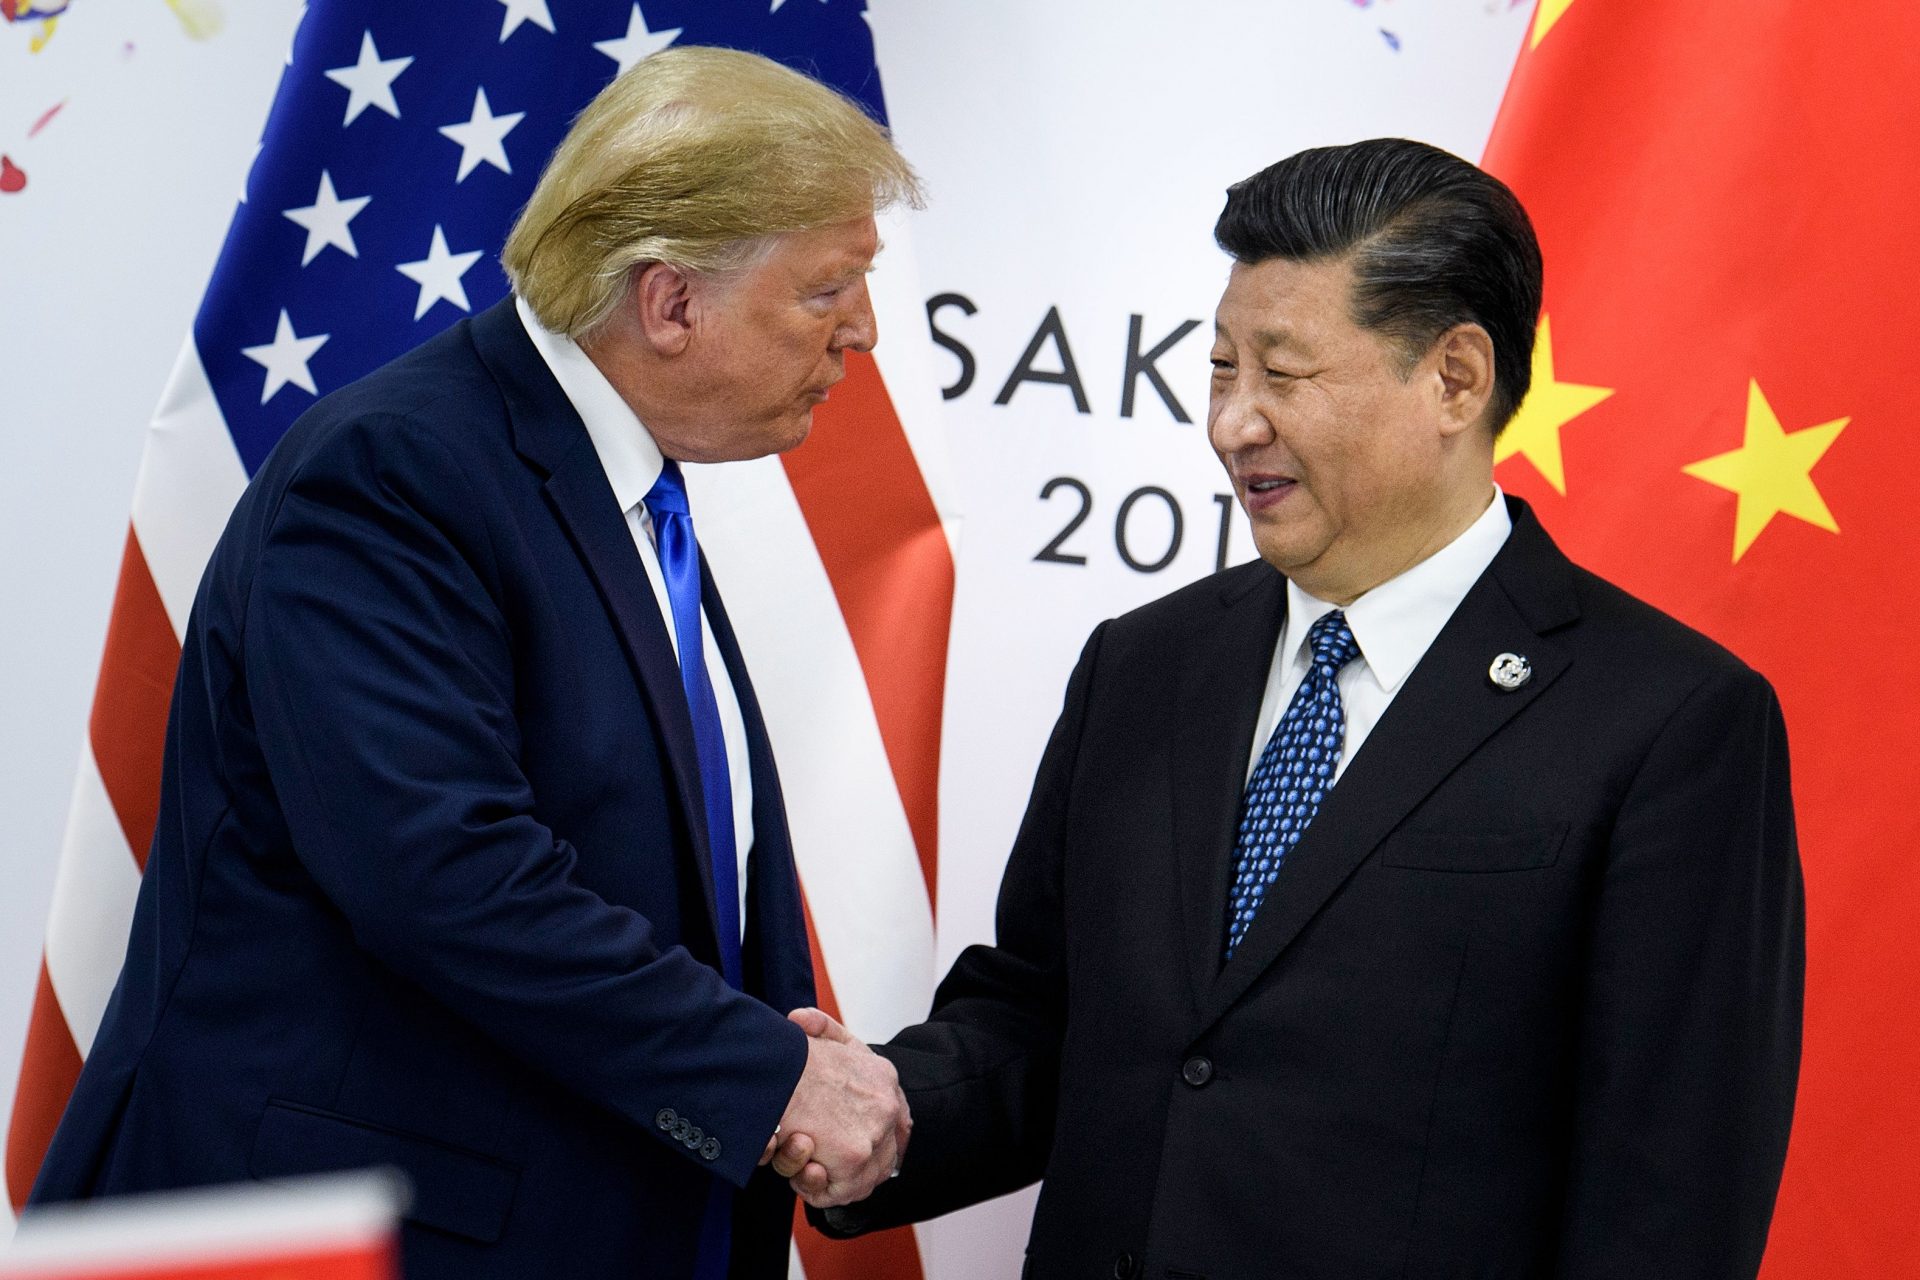 Does Trump want to be America’s Xi Jinping?